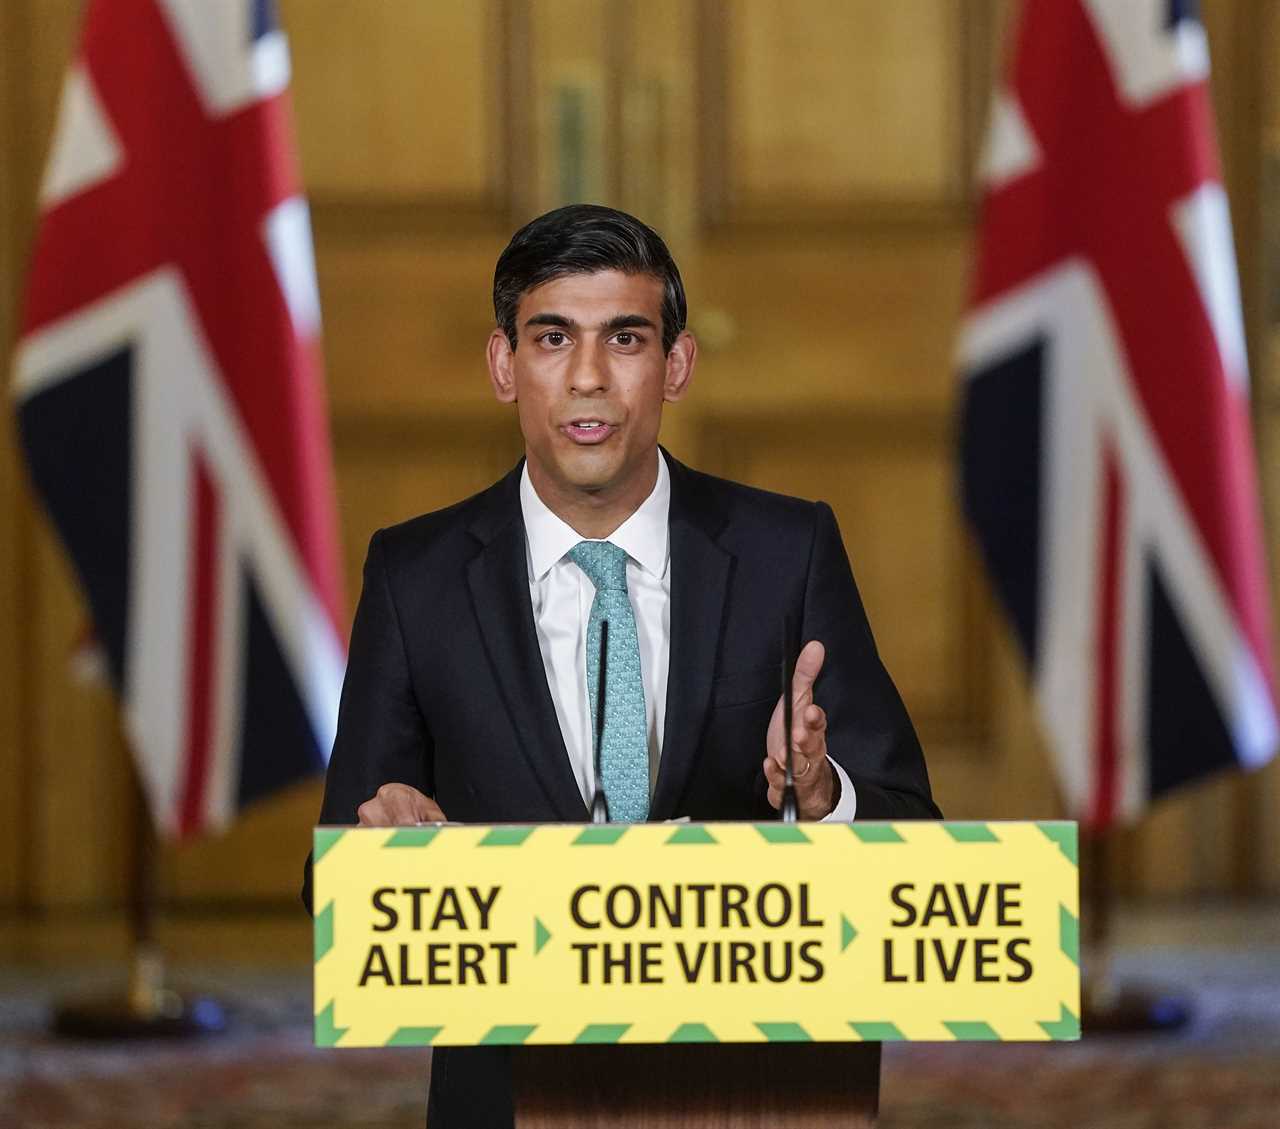 Rishi Sunak ‘to announce formal bid to become PM tomorrow’ with promise to fix broken economy